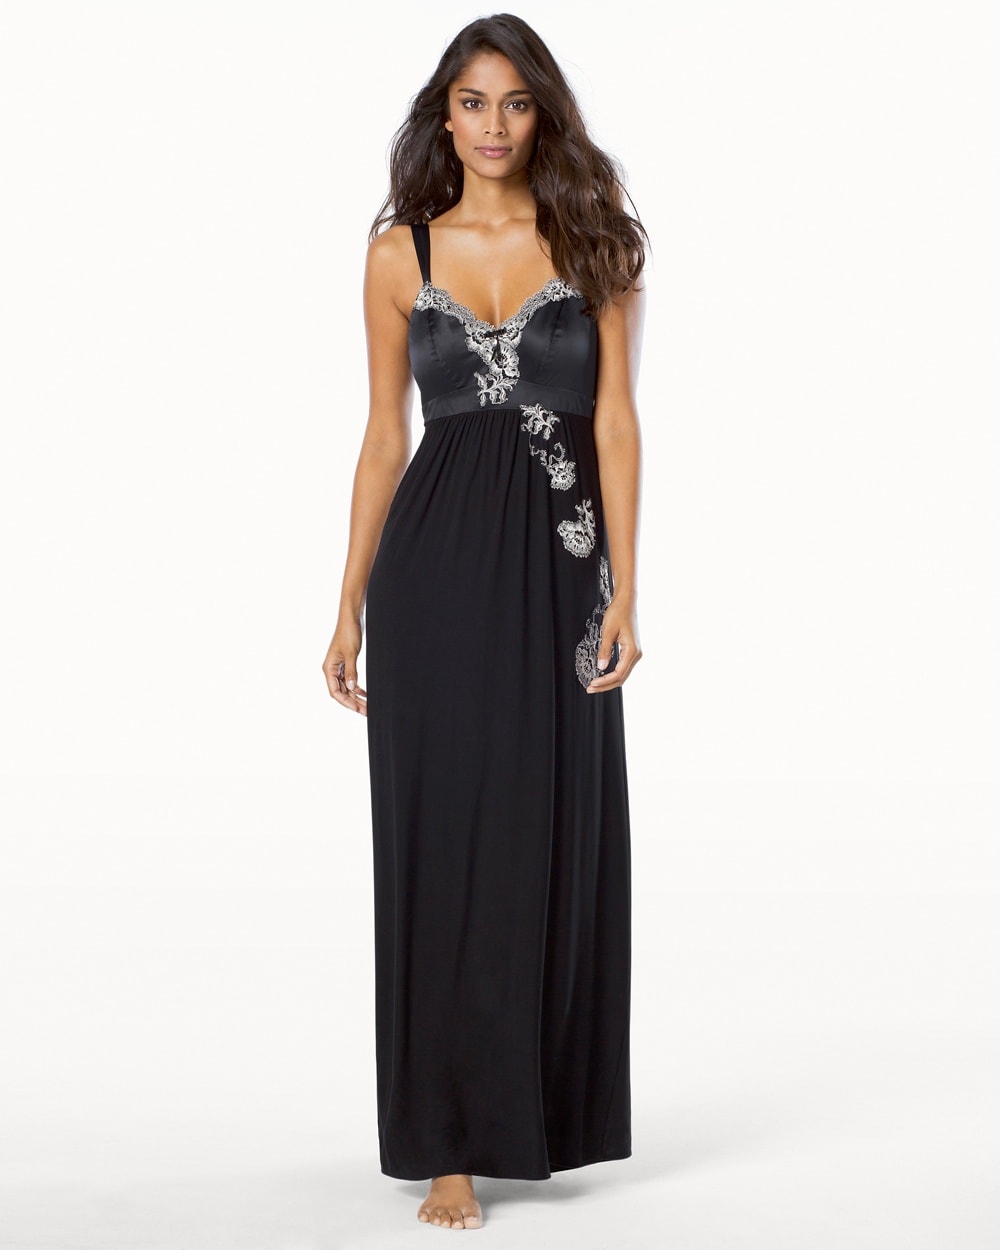 Alluring Satin and Lace Adorned Long Nightgown